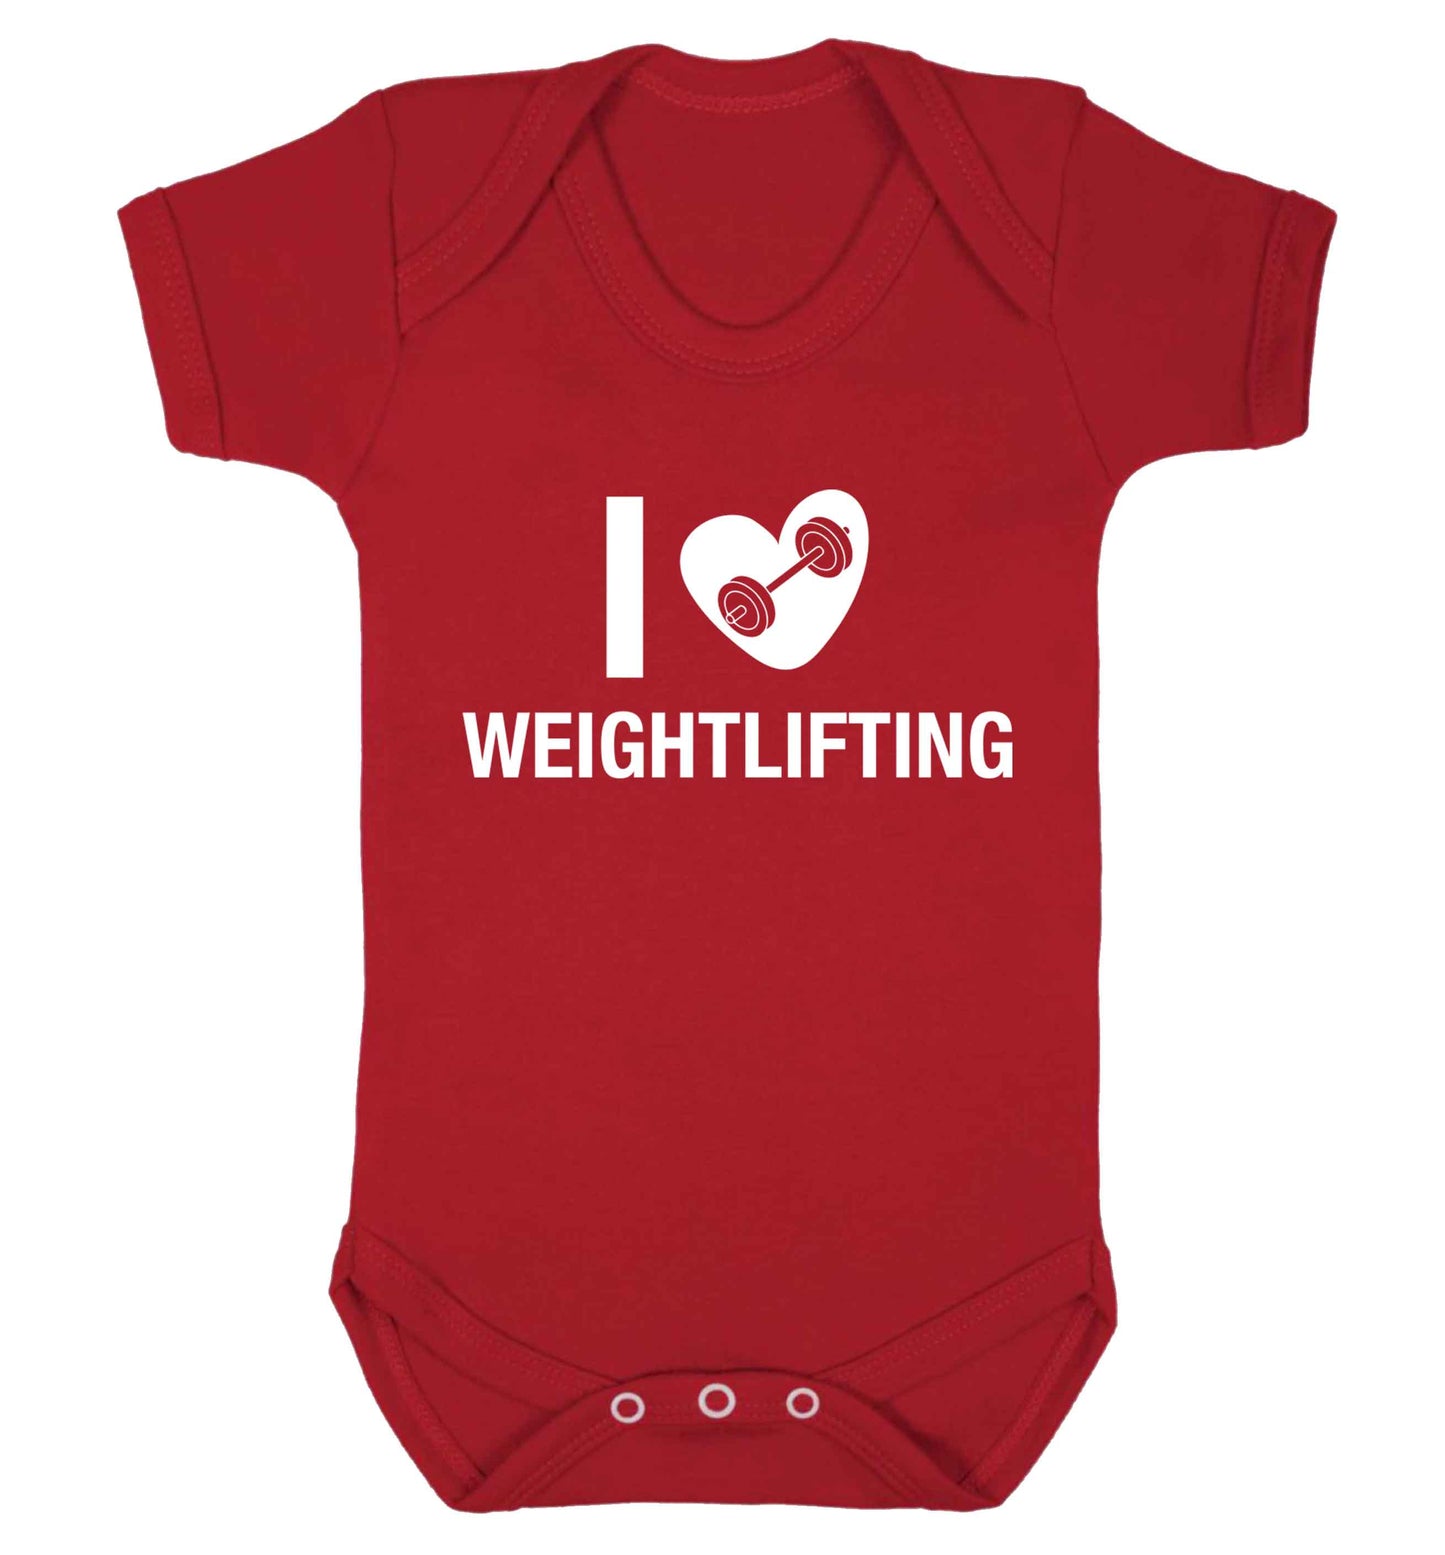 I love weightlifting Baby Vest red 18-24 months